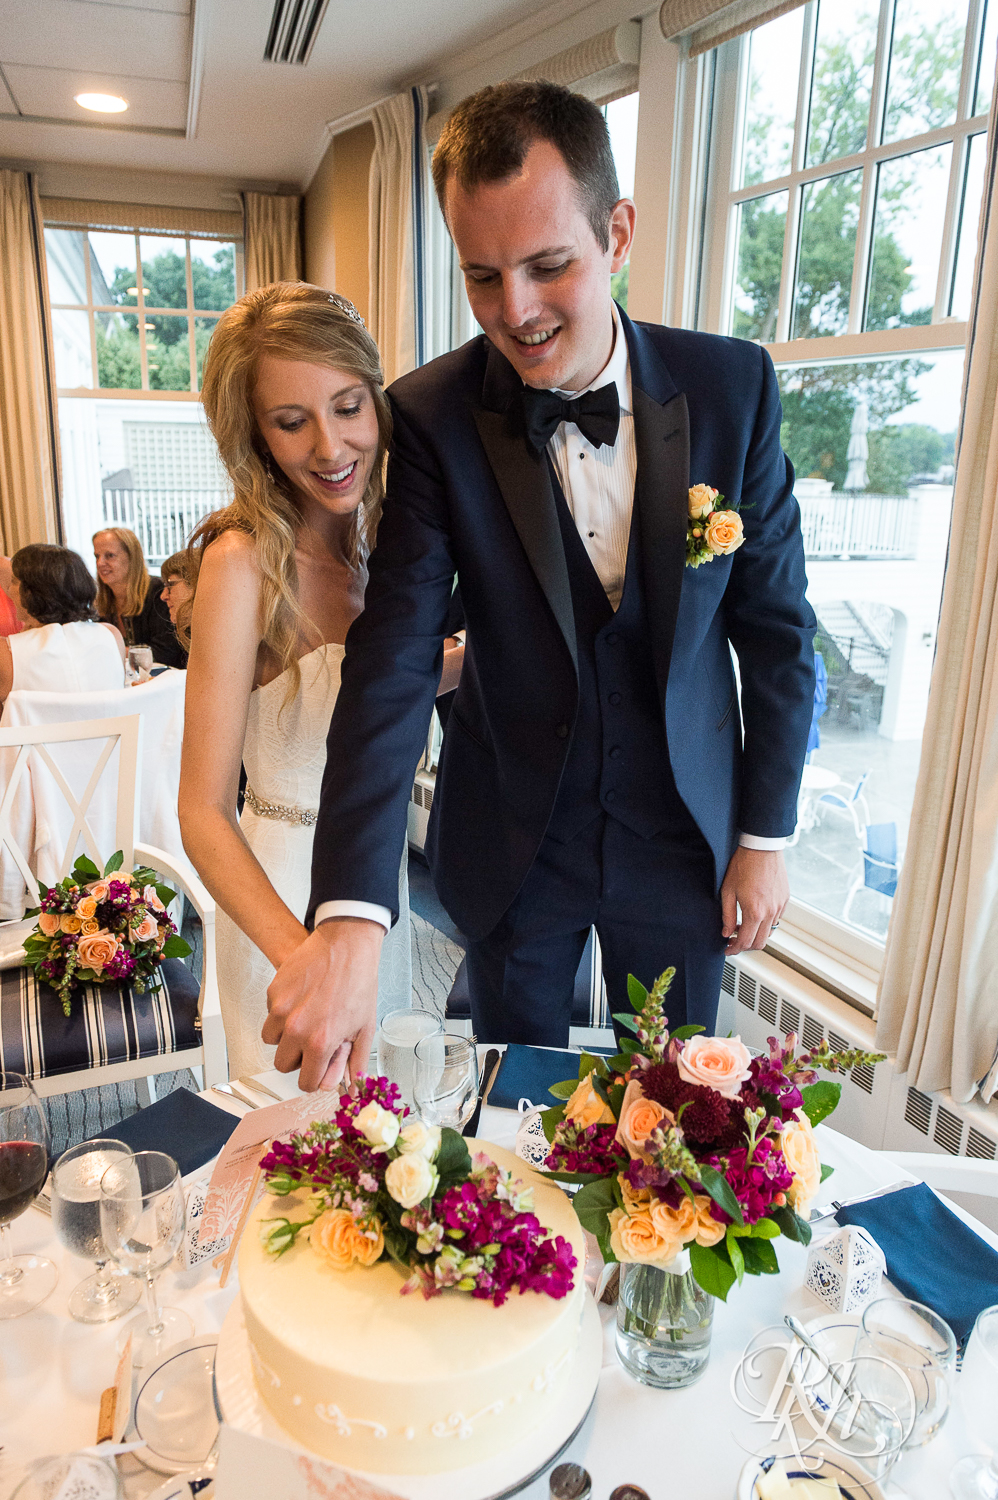 Bride and groom cut cake during reception at White Bear Yacht Club in Dellwood, Minnesota.